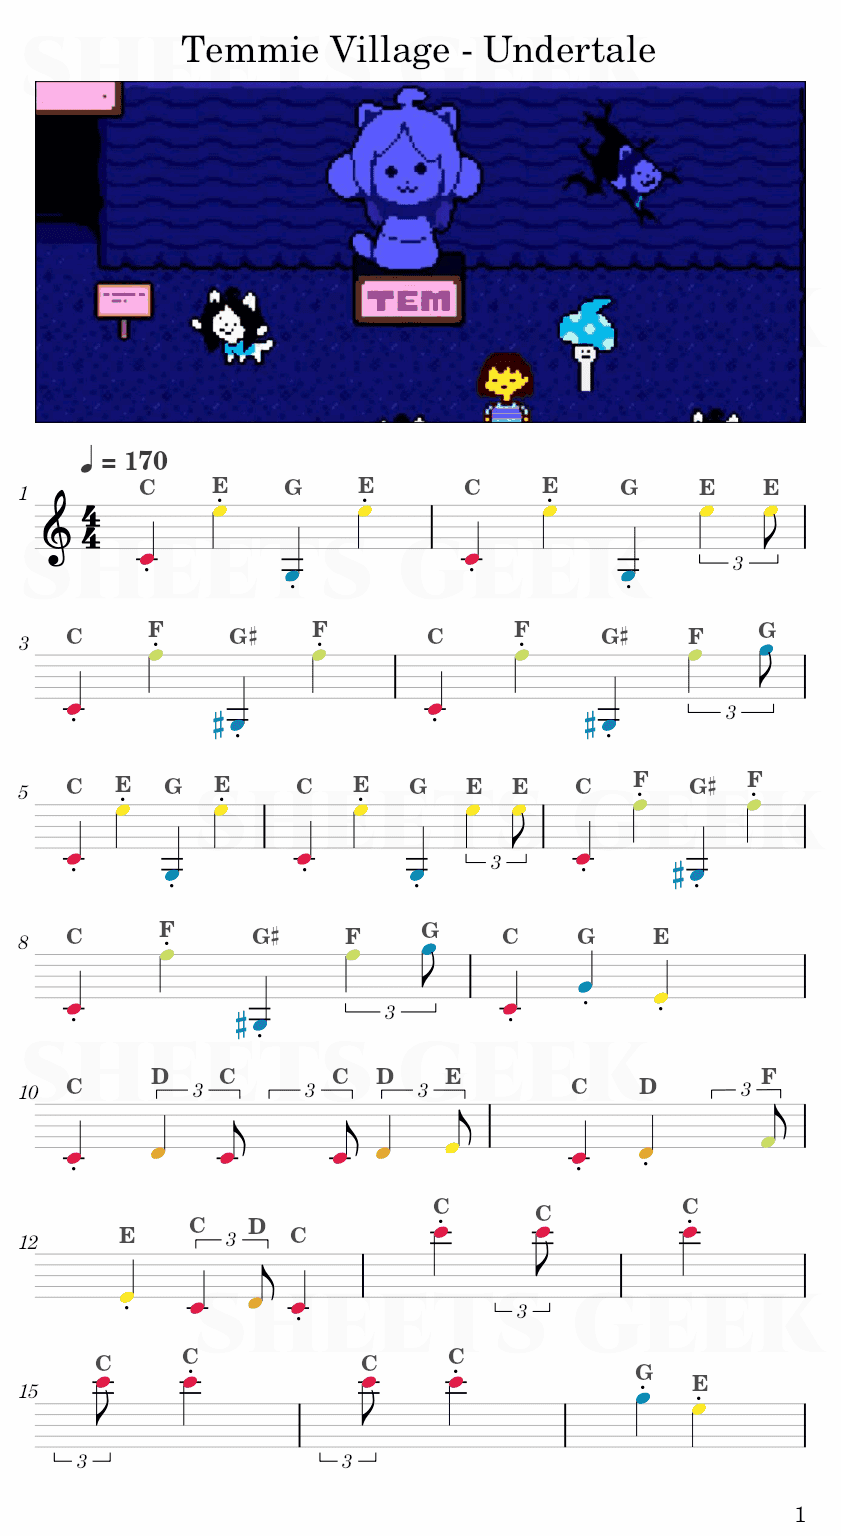 Temmie Village - Undertale Easy Sheet Music Free for piano, keyboard, flute, violin, sax, cello page 1